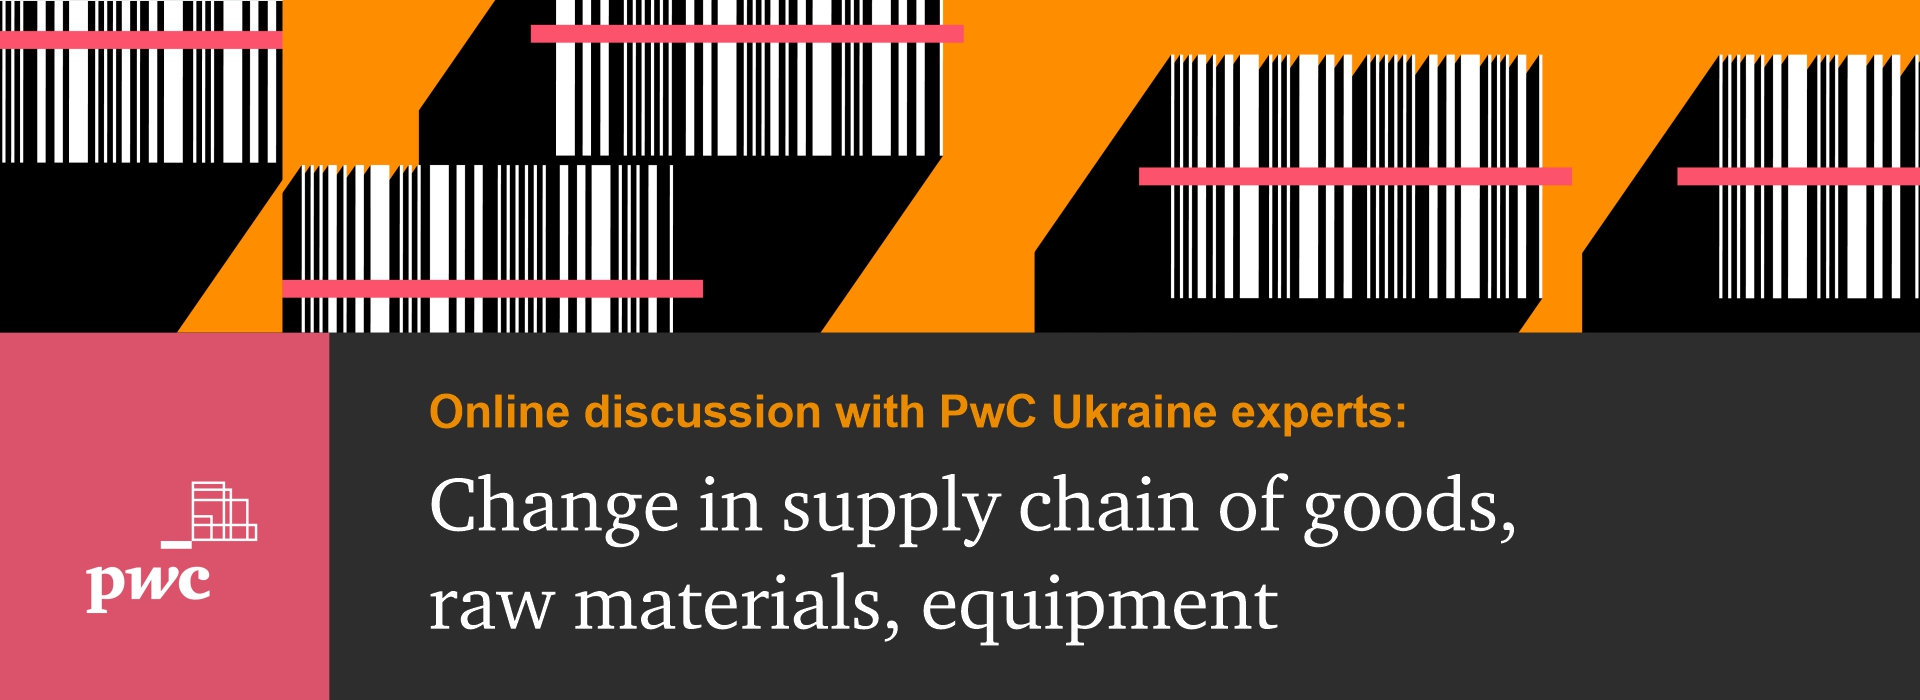 Online Discussion with PwC Ukraine Experts 